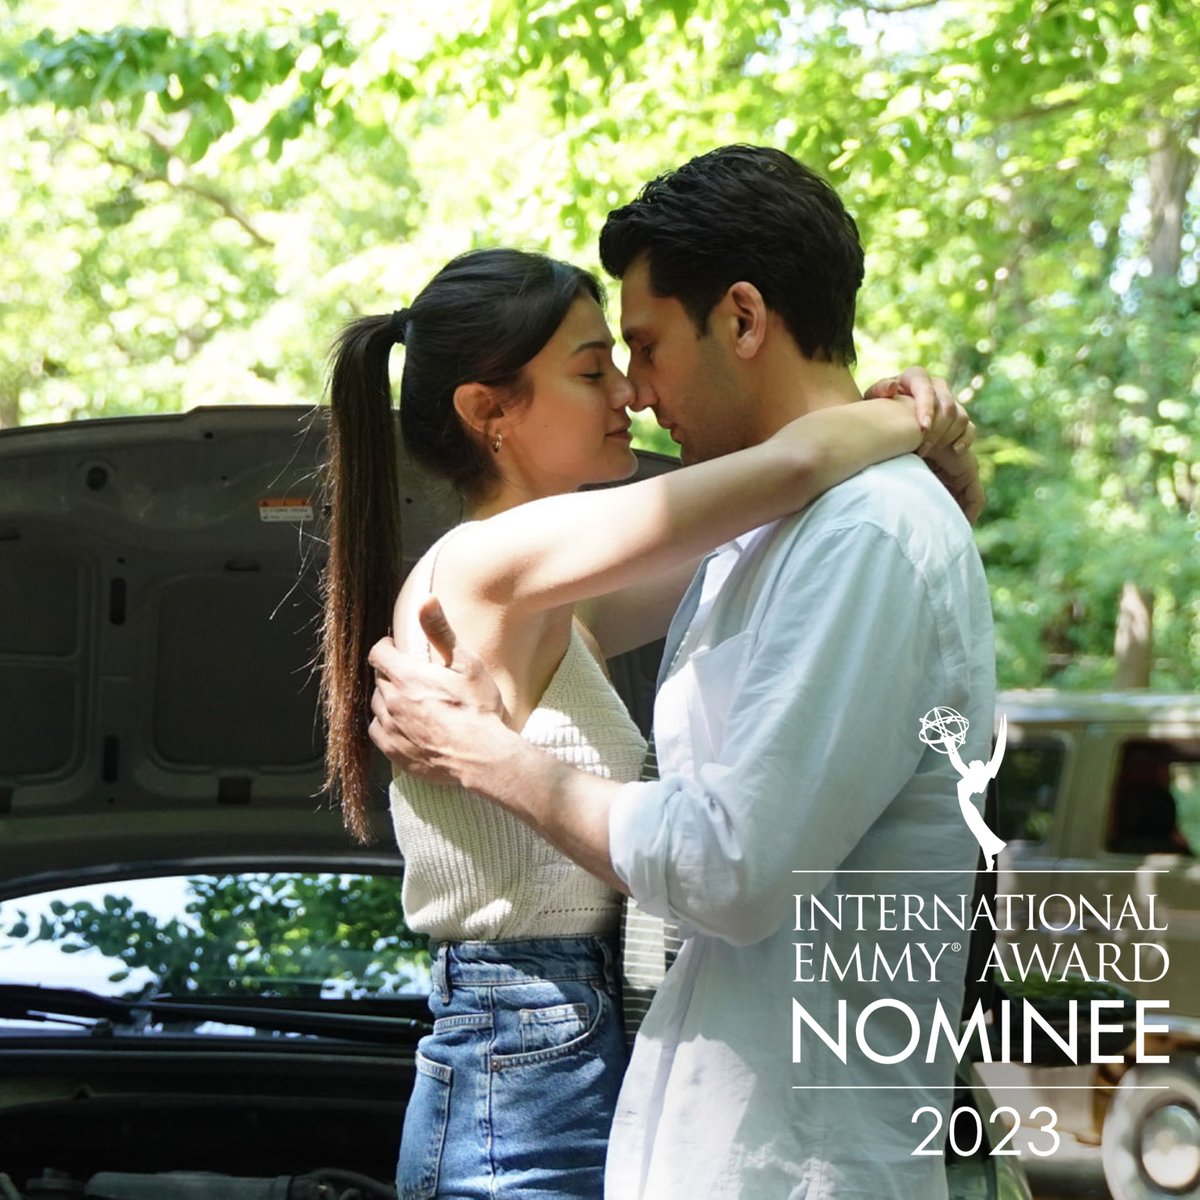 Nominee Highlight for Telenovela: “Yargi [Family Secrets]” Produced by @ayyapim Watch the #iemmyNOM trailer here: bit.ly/3SK8kGn Winners will be announced Monday, November 20, at The 51st International Emmy Awards in New York City! #iemmys